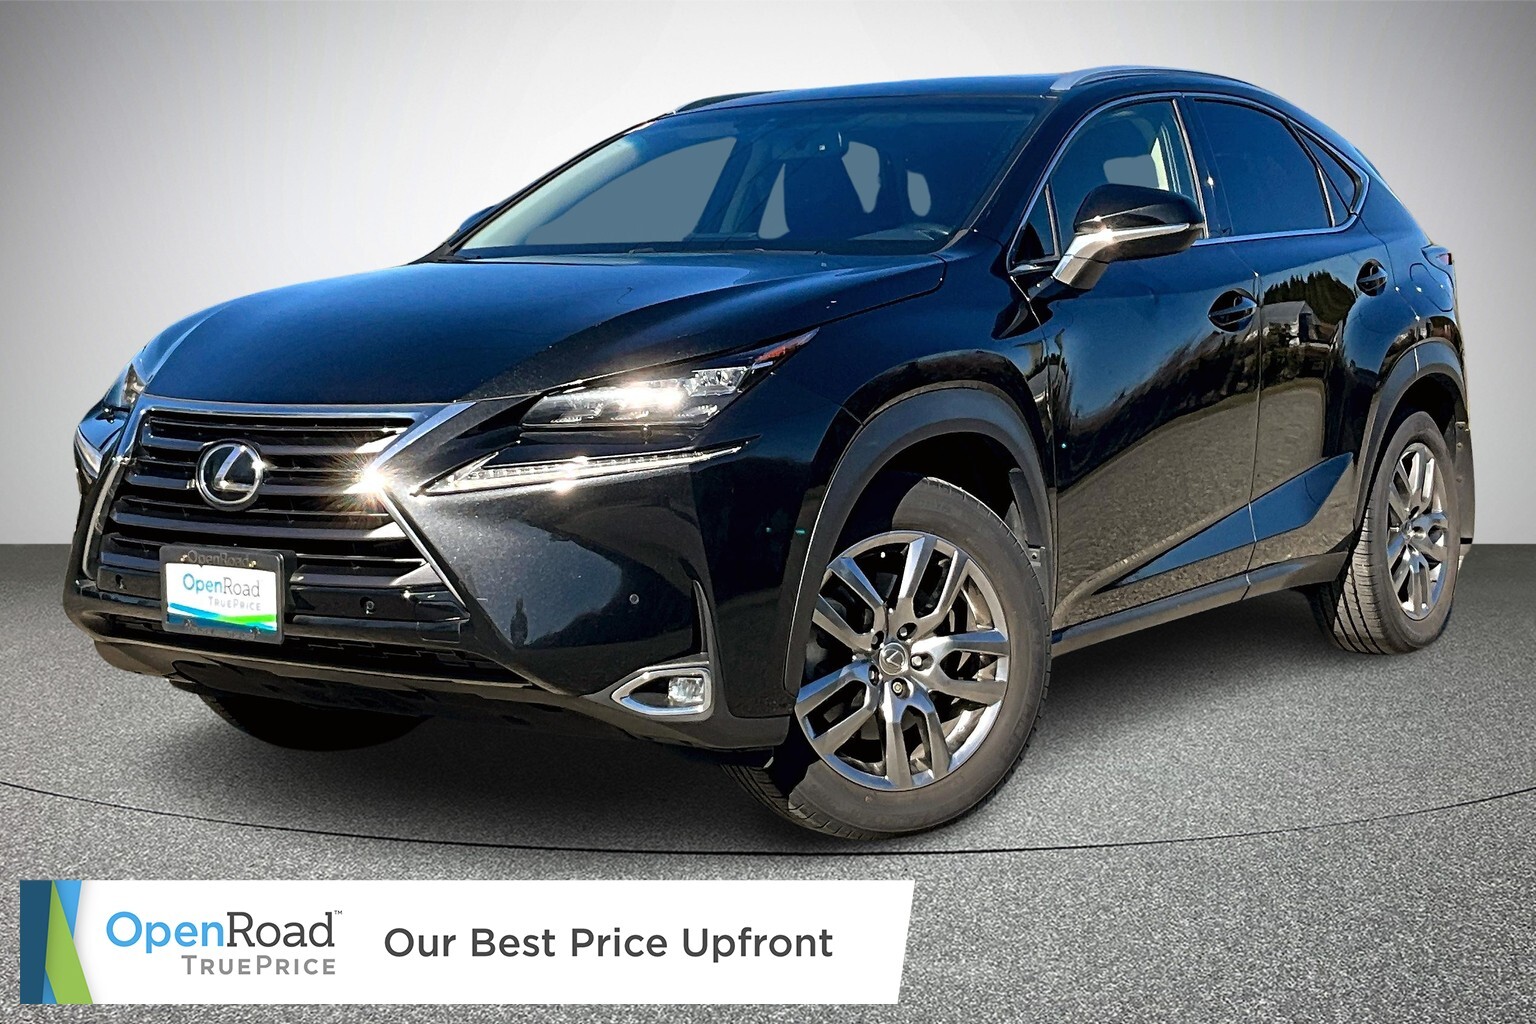 2017 Lexus NX 200t AWD 4dr - For as little as $332.99 bi-weekly!